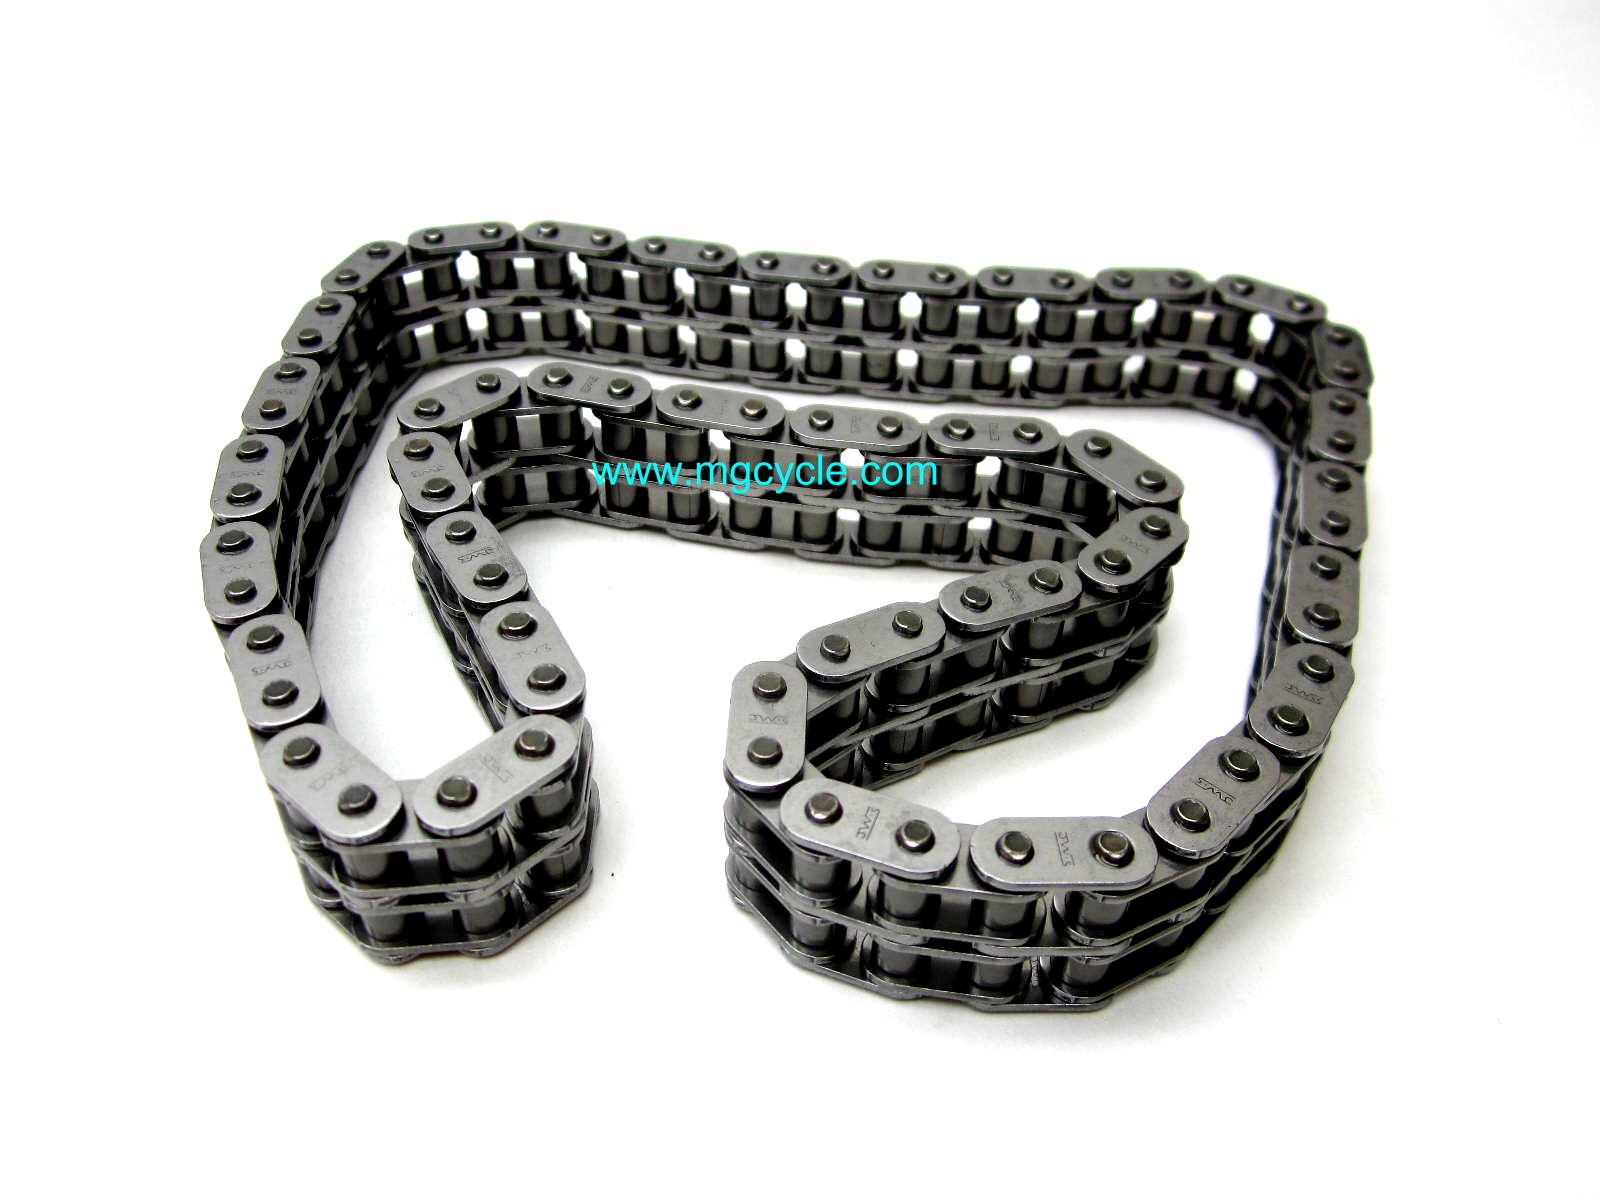 One piece no master link timing chain 750/850/1000/1100 some1200 - Click Image to Close